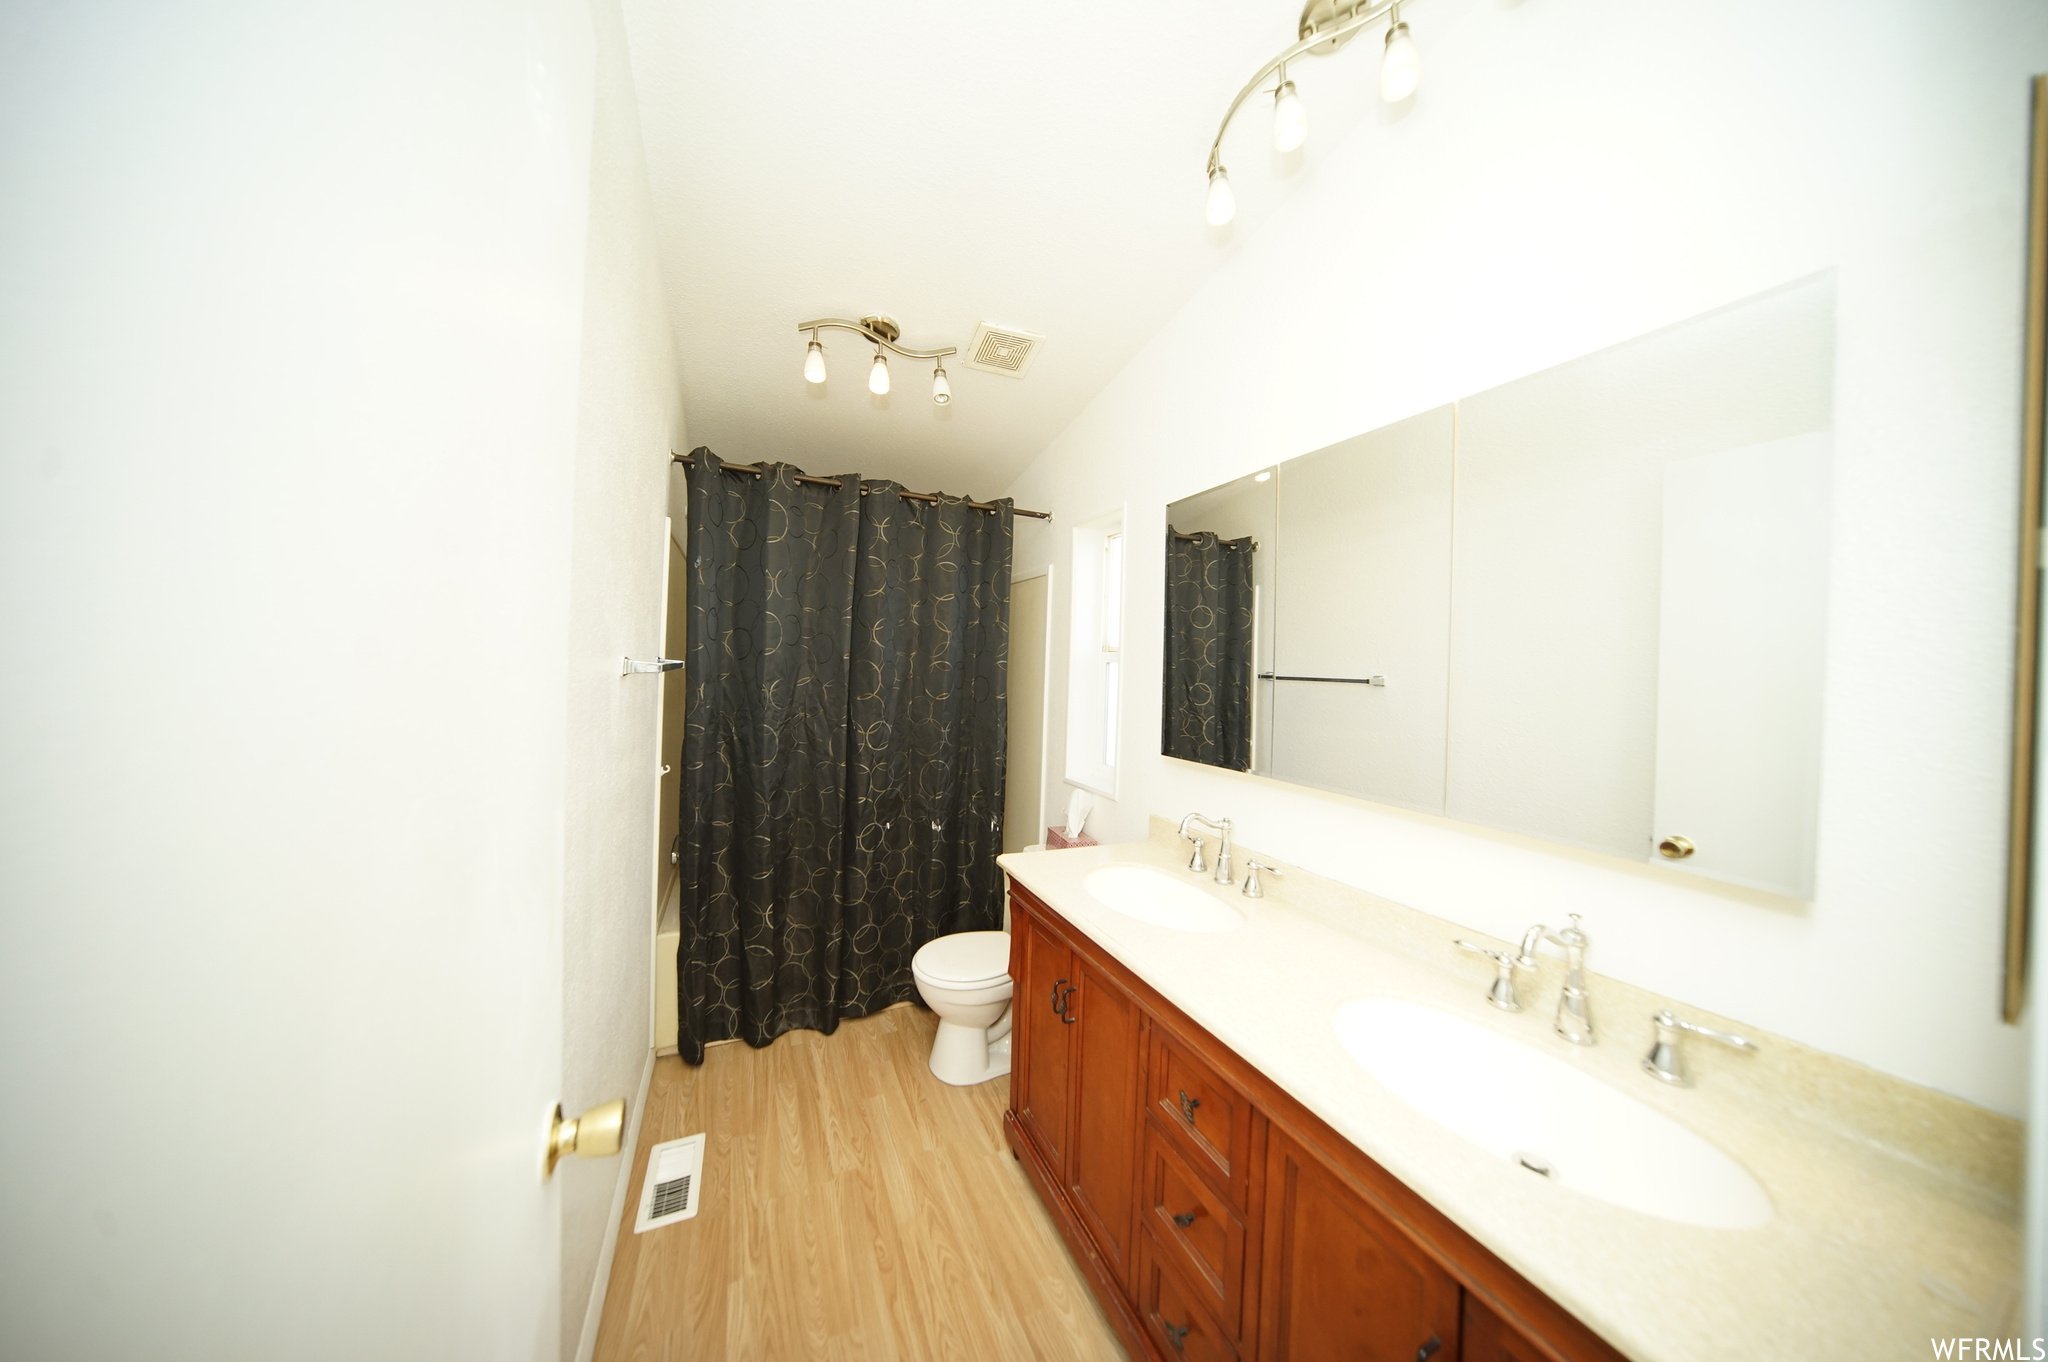 Bathroom with vaulted ceiling, oversized vanity, toilet, double sink, and rail lighting